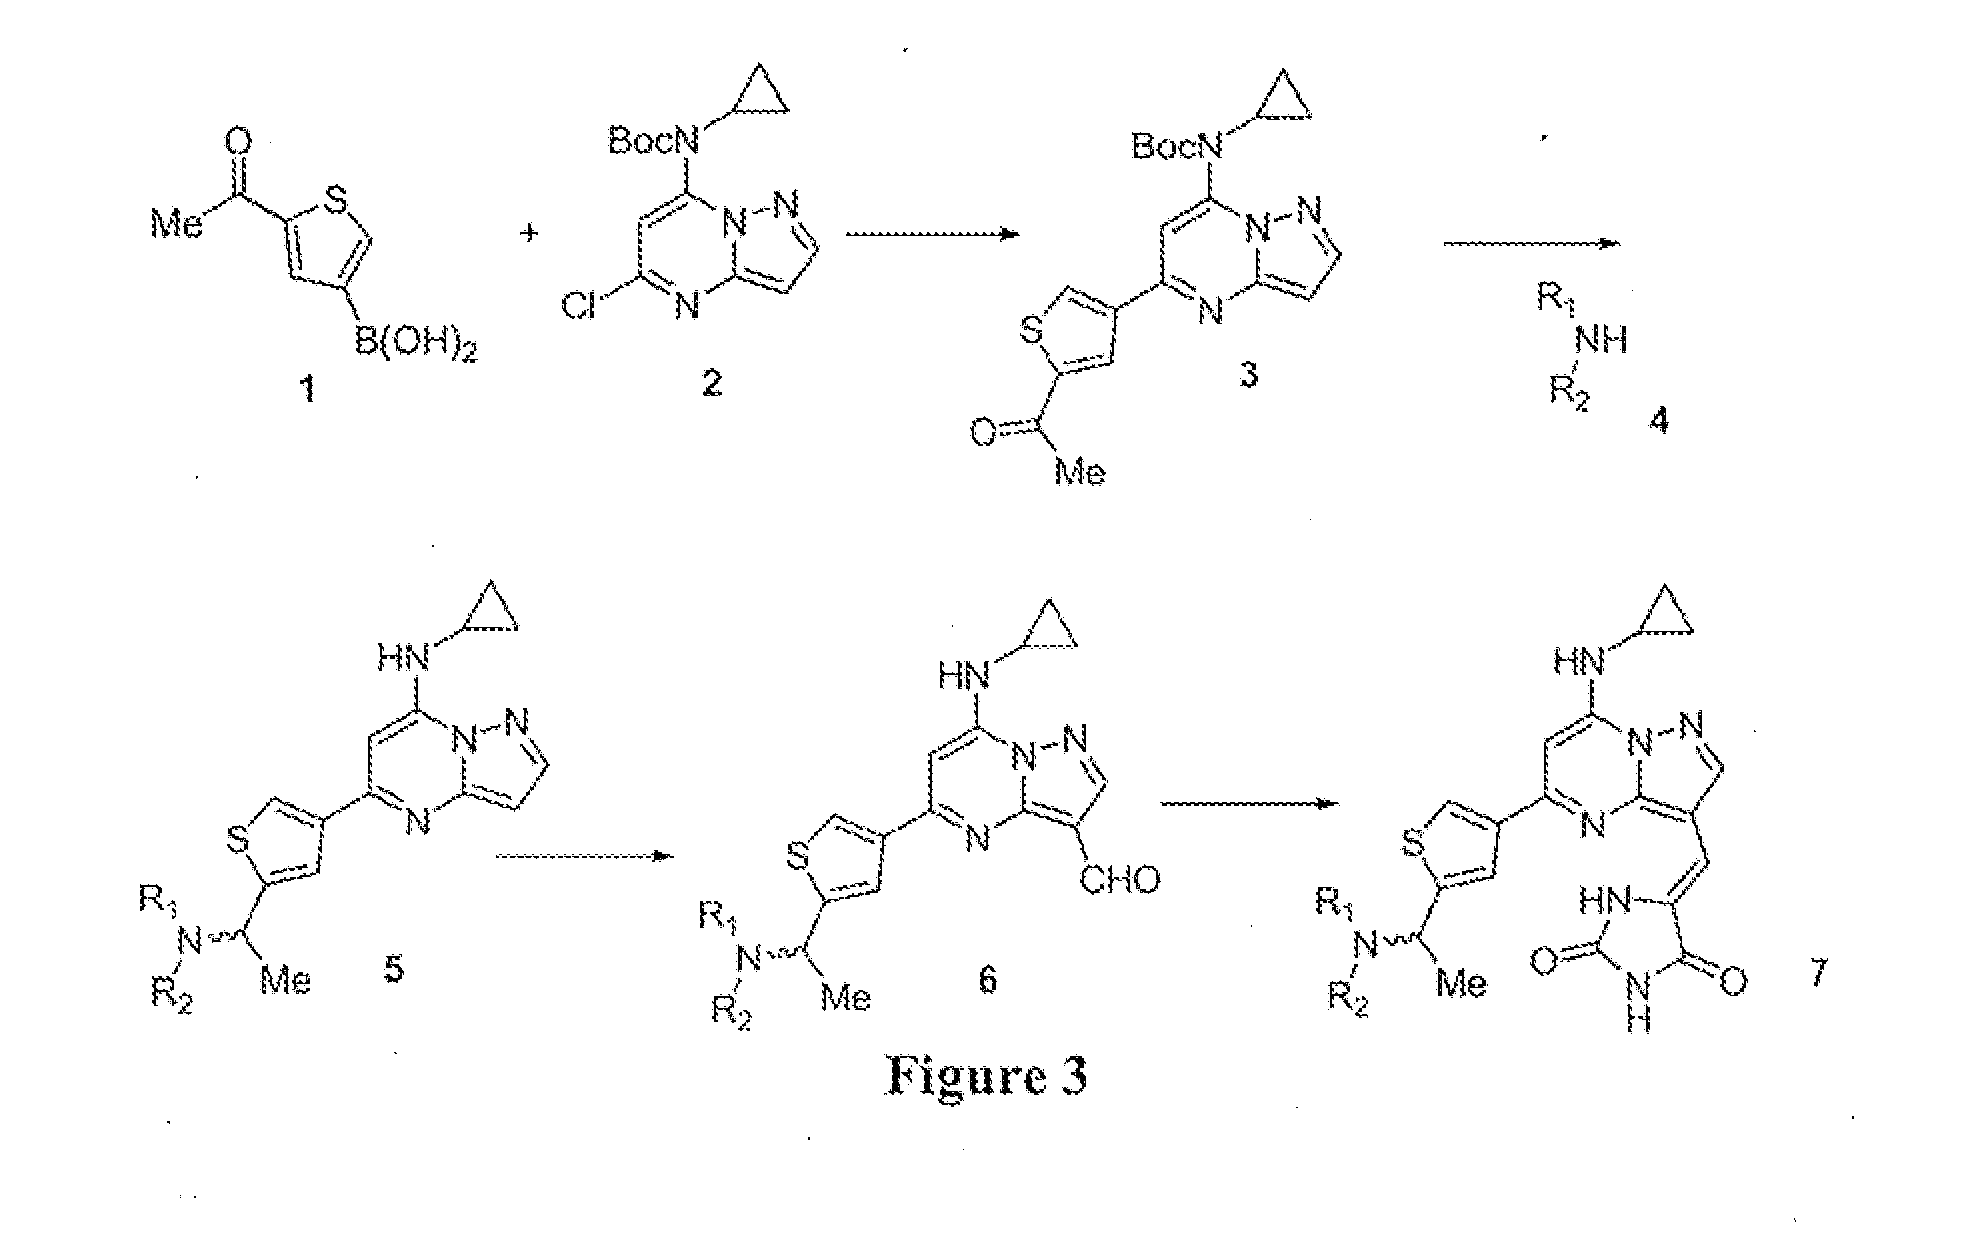 Pyrazolopyrimidines and related heterocycles as ck2 inhibitors